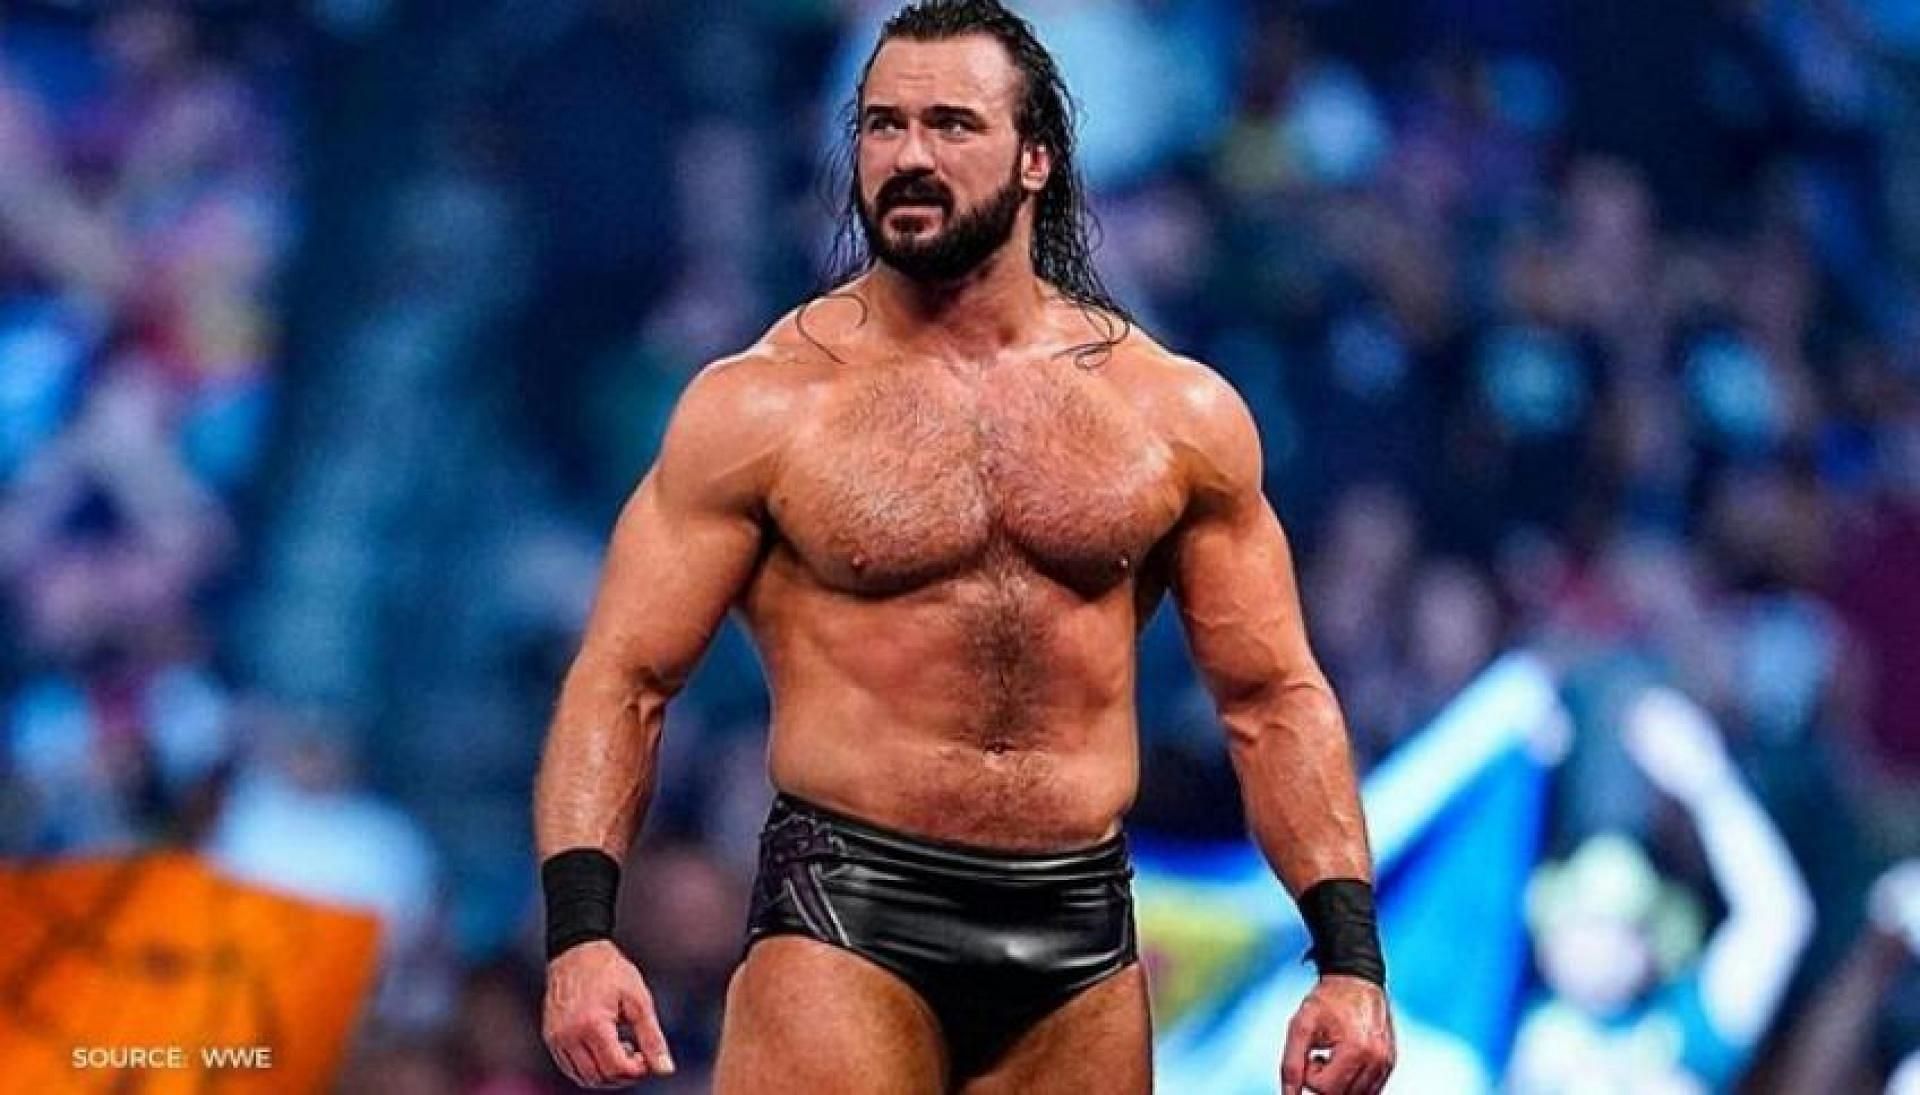 Drew McIntyre would be a main event star in any promotion